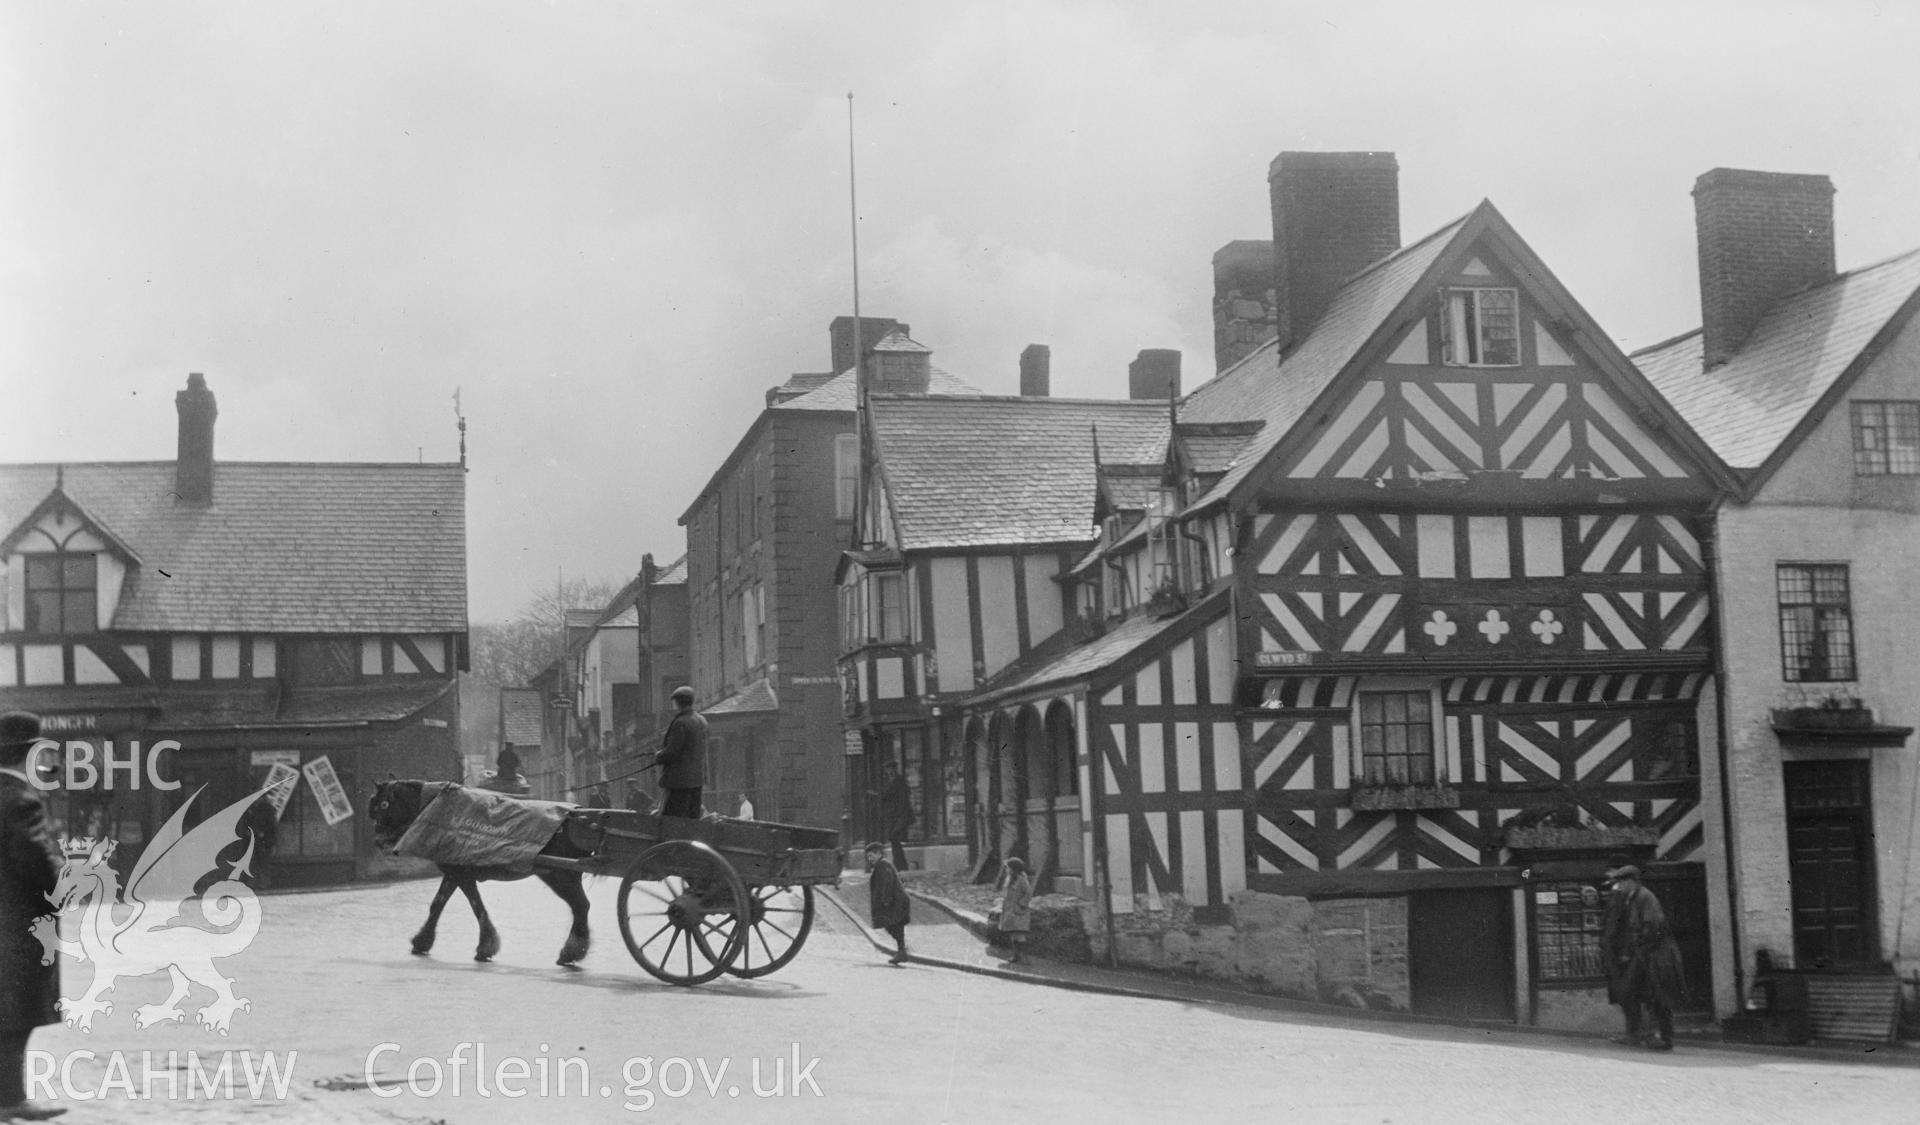 Digital copy of a nitrate negative showing view of Barclays Bank, Ruthin, undated.